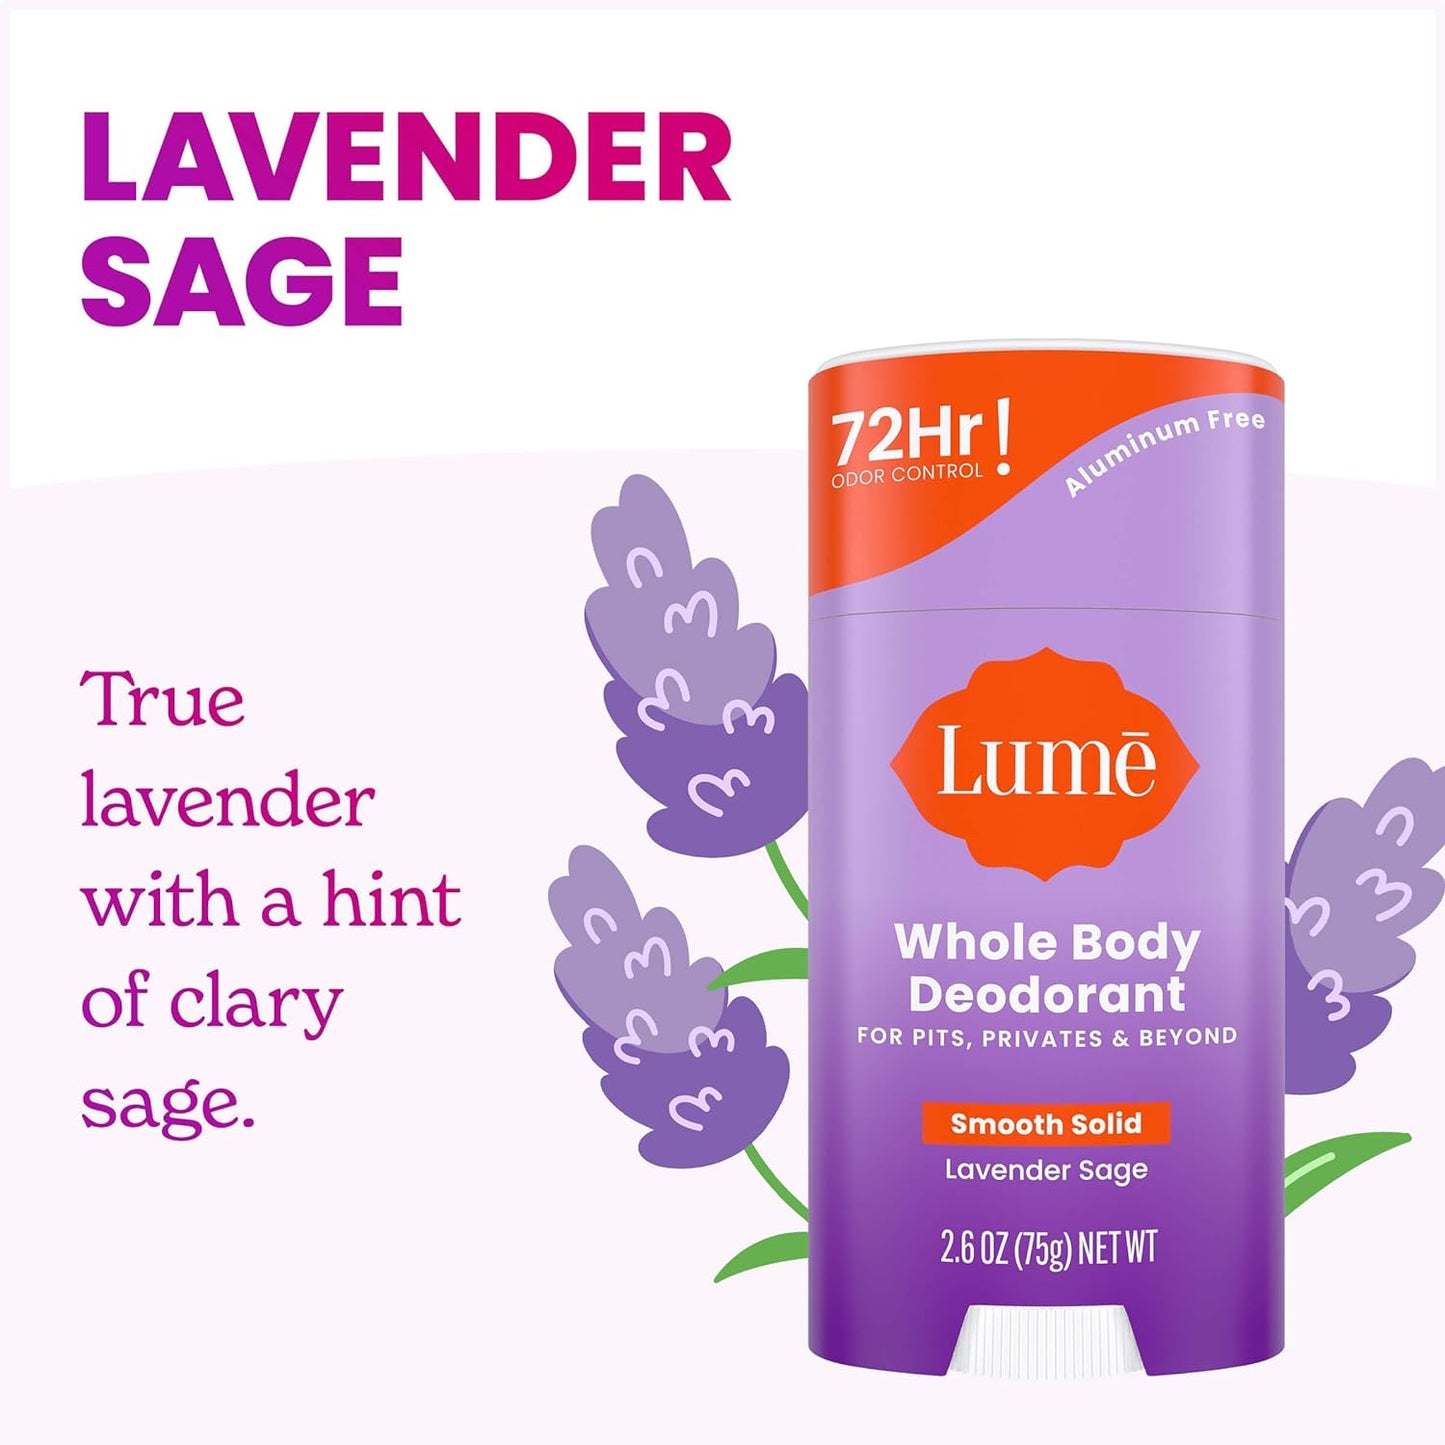 Lume Whole Body Deodorant - Invisible Cream Tube Mini and Solid Stick - 72 Hour Odor Control - Aluminum Free, Baking Soda Free, Skin Safe - 0.5 Ounce Mini Tube + 2.6 Ounce Solid Stick Bundle (Lavender Sage) - Premium  from Concordia Style Boutique - Just $28.86! Shop now at Concordia Style Boutique